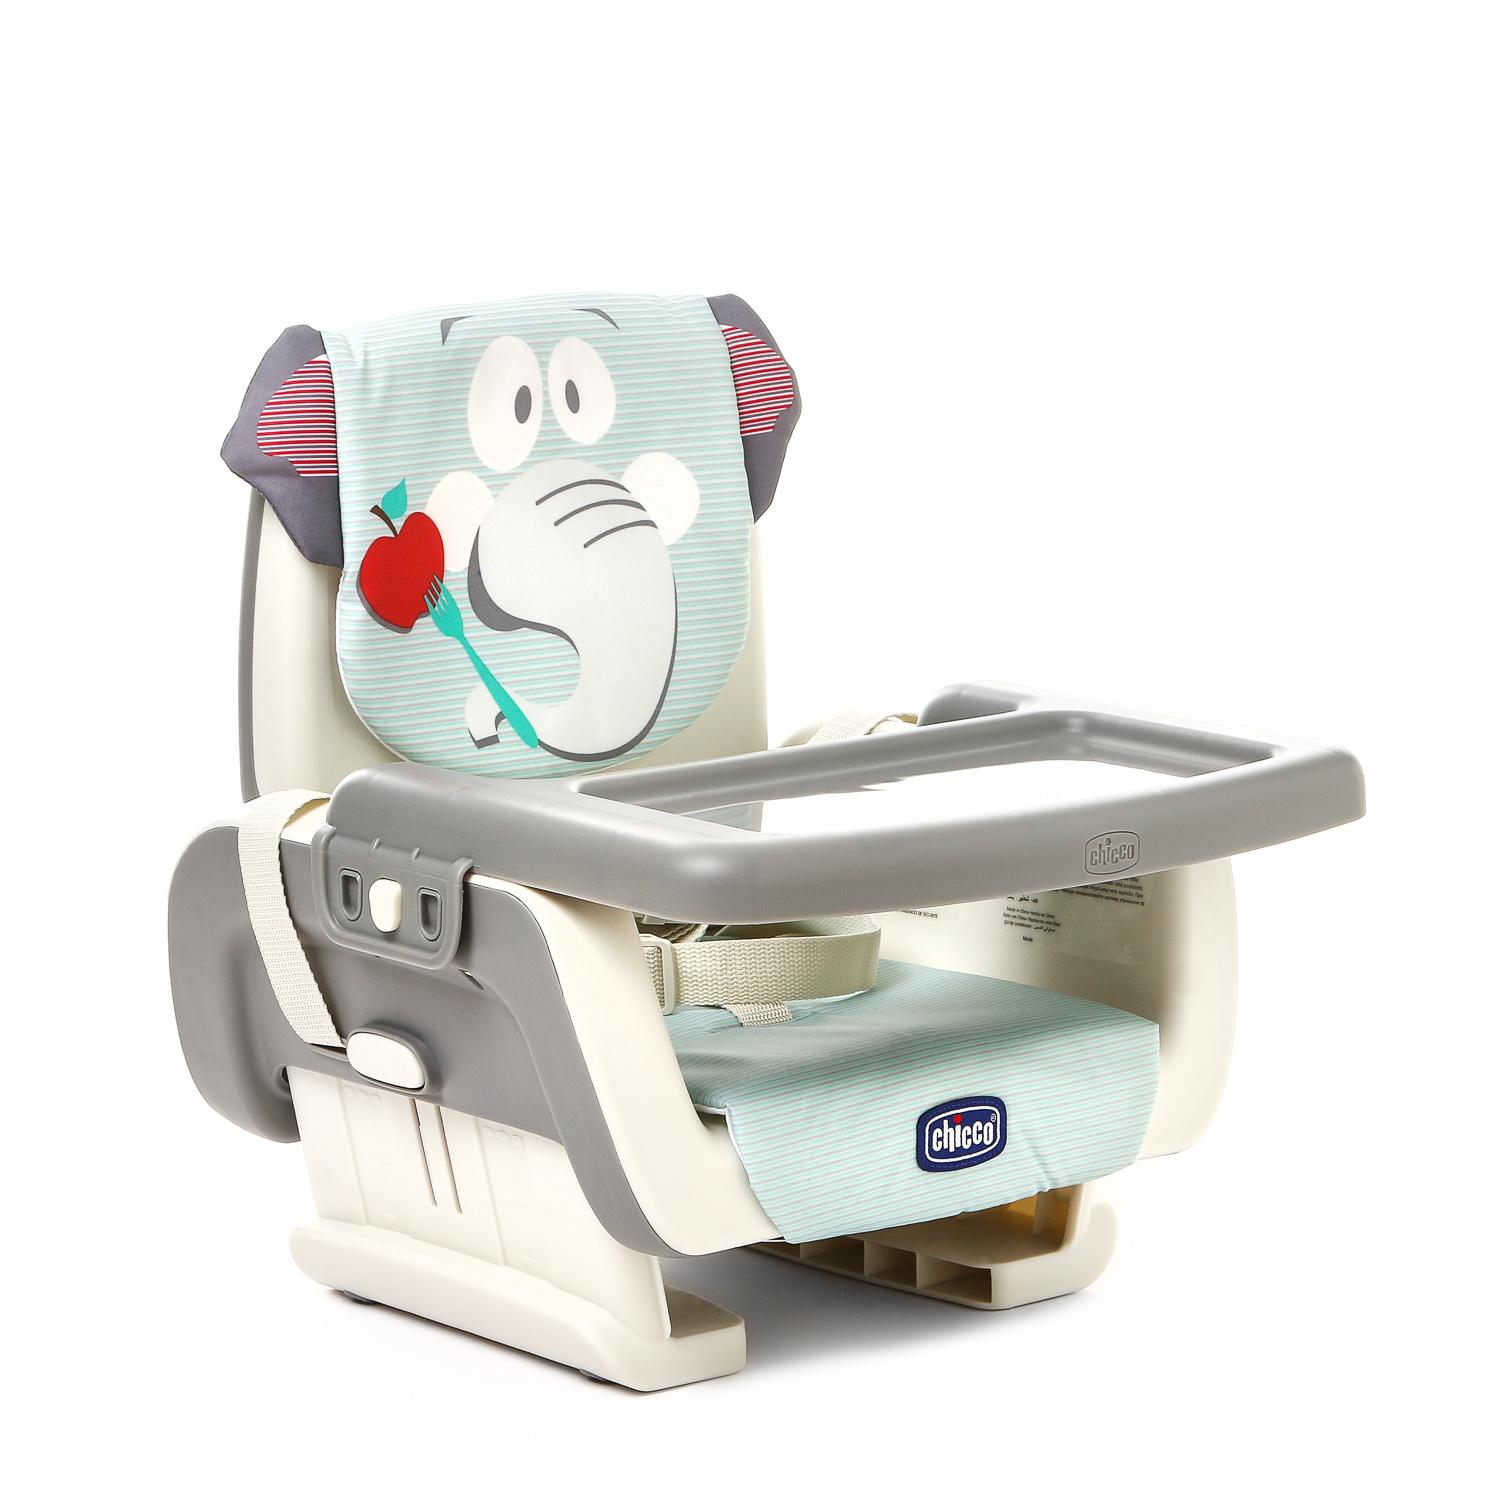 Irdy Chicco Philippines Irdy Chicco Highchairs For Sale Prices